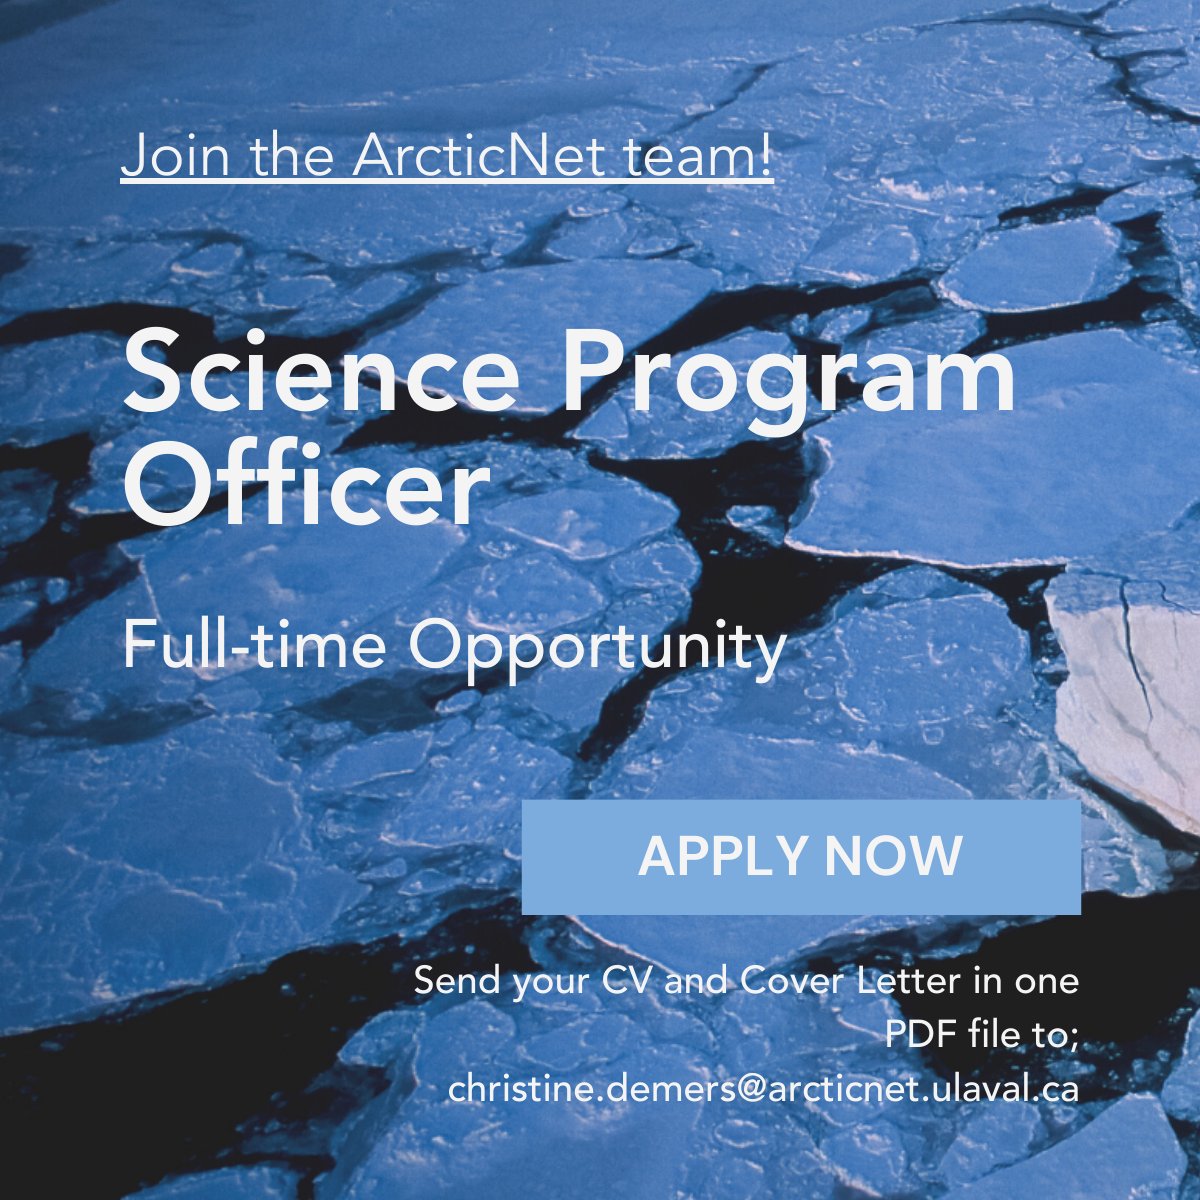 We're hiring! If you think you're right for the position, send your CV and cover letter in one PDF to: christine.demers@arcticnet.ulaval.ca. To view the job posting, click here; bit.ly/443GJ6q